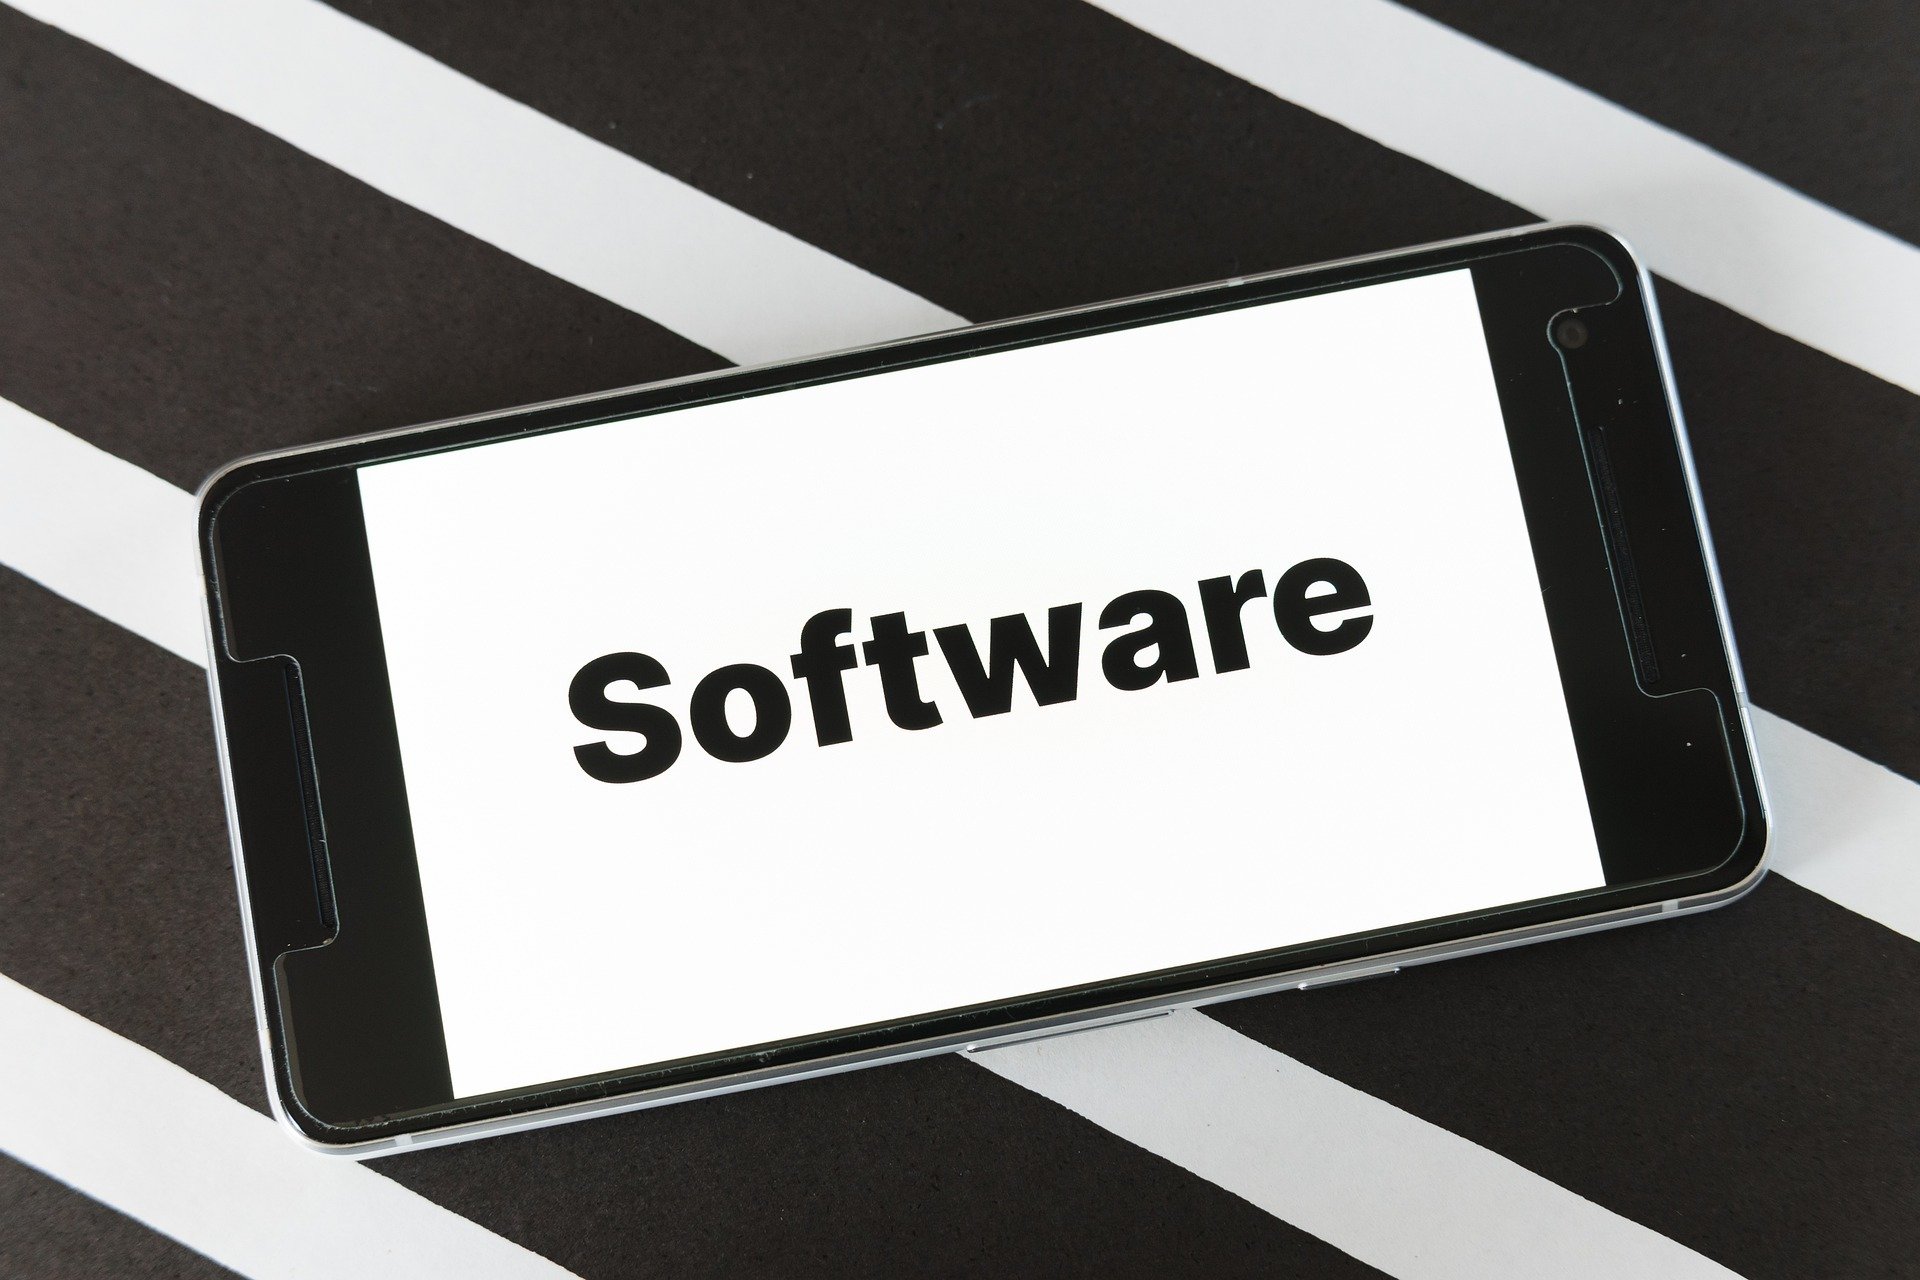 Revolutionize Your Business with Our Powerful No-Code Softwares